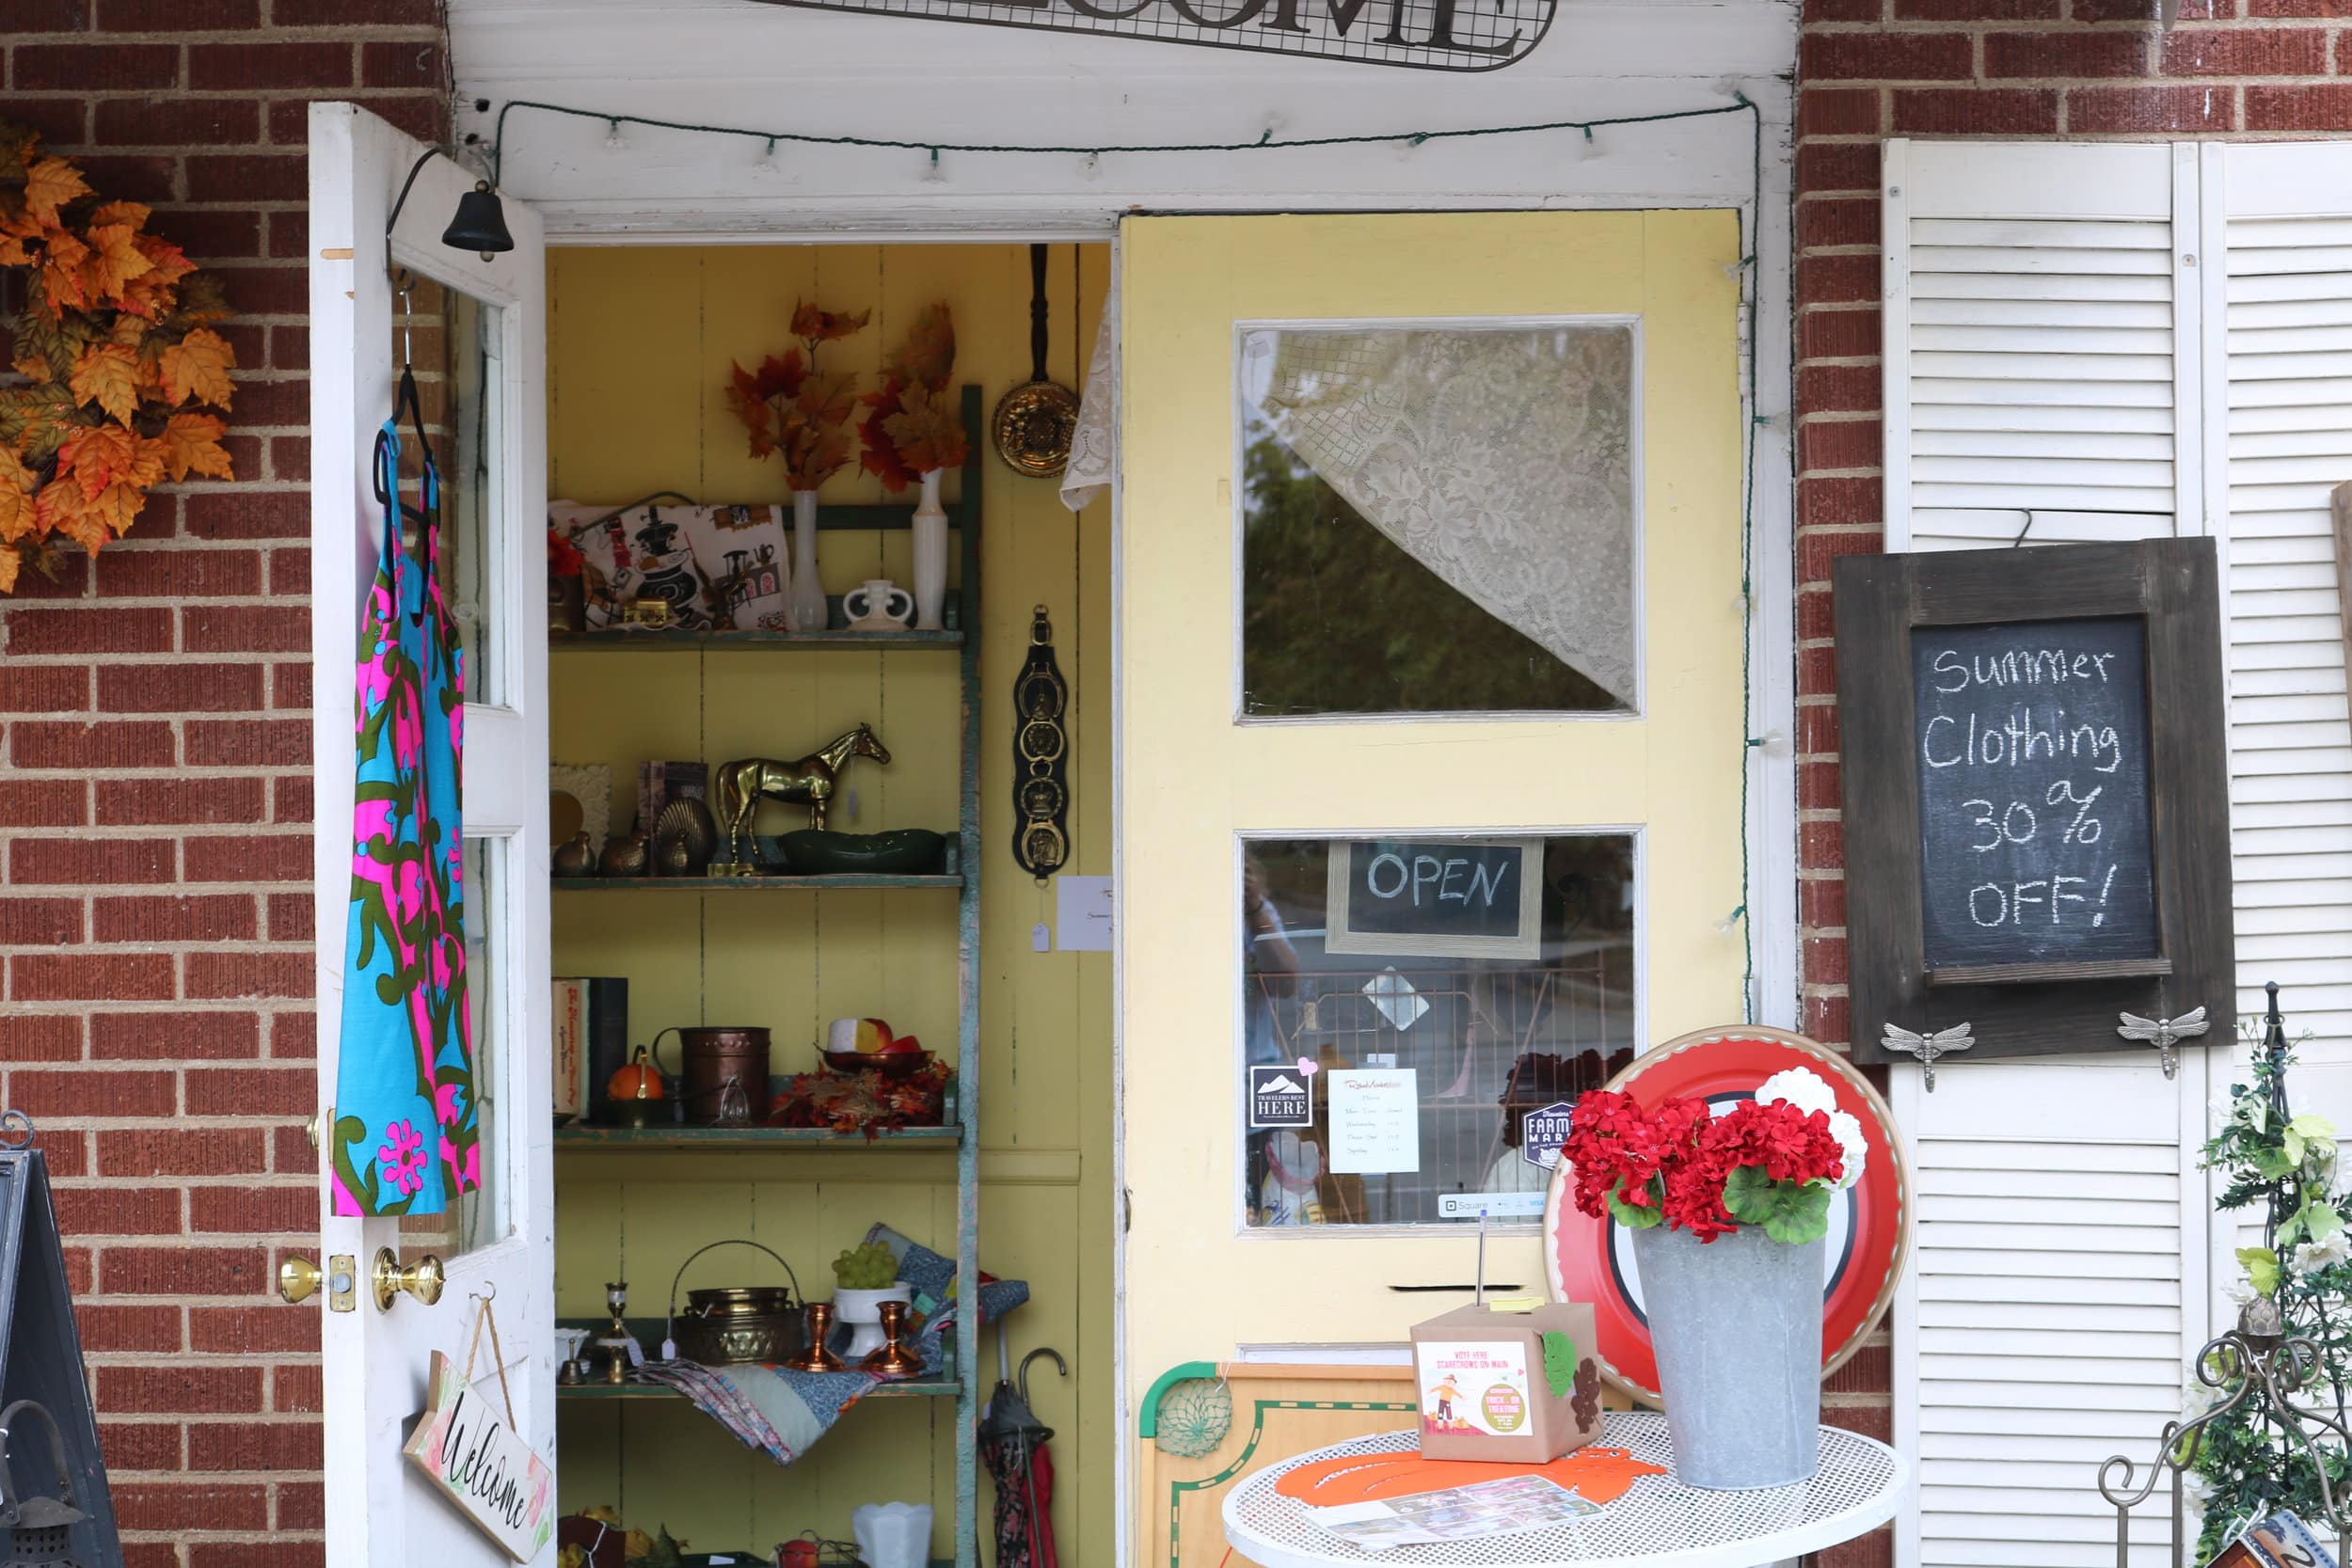 Their bright yellow doors and their trinkets welcomes guests down the stairs to their cute little store.